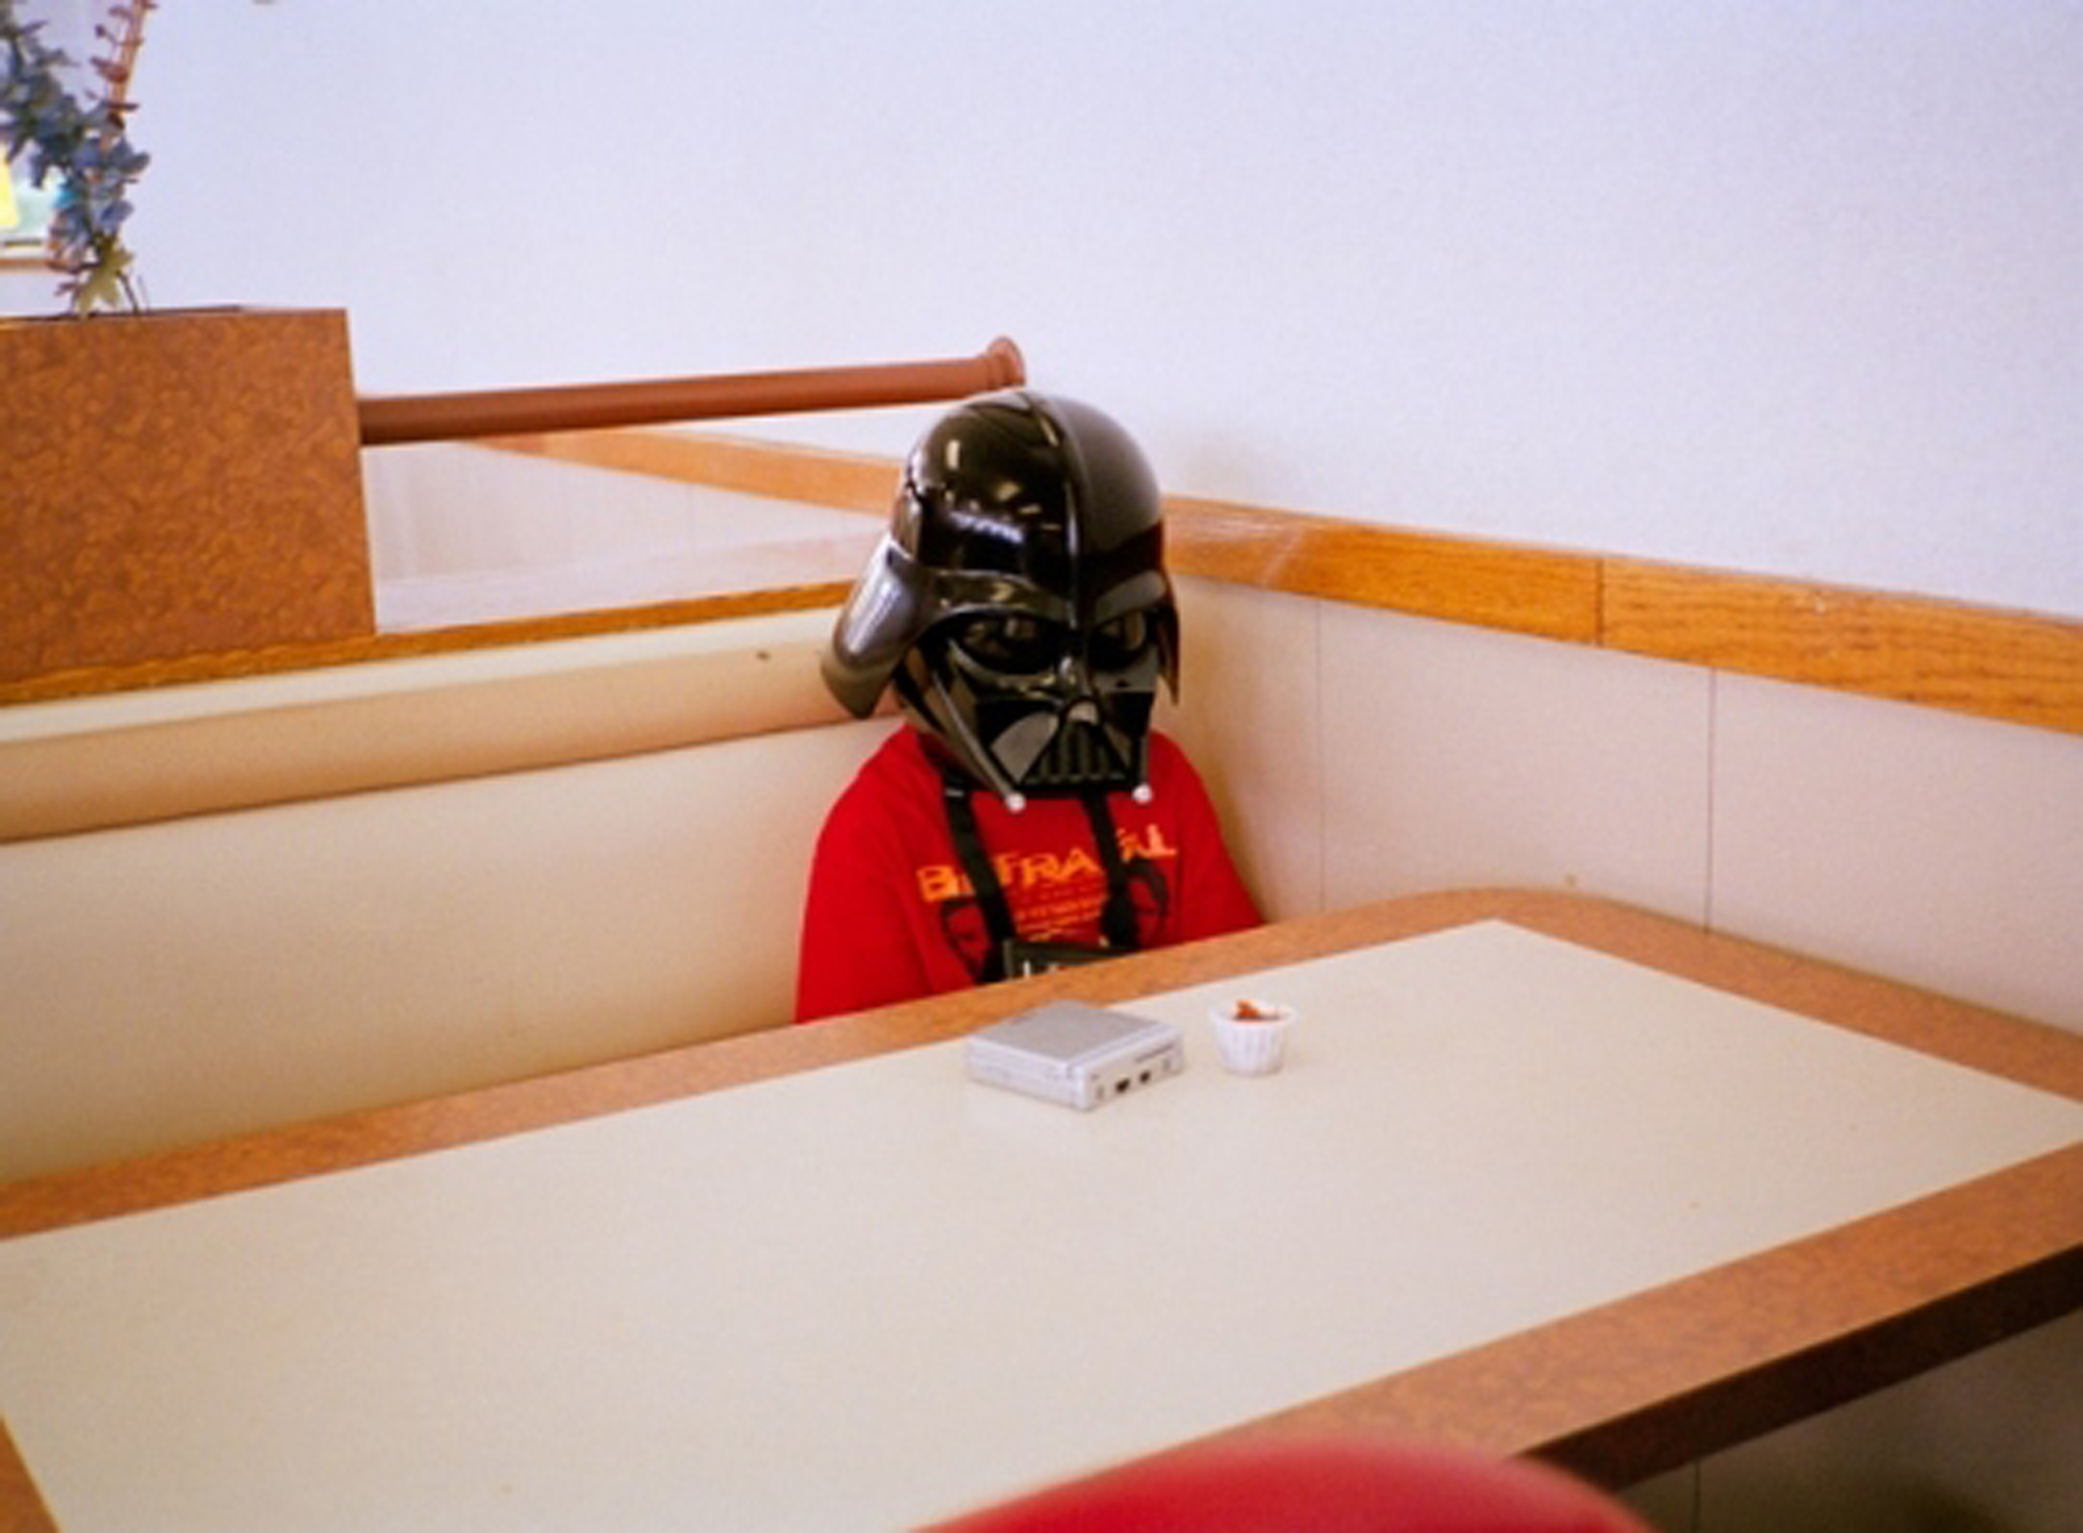 This photo of a kid dressed as Darth Vader inside a Burger King inspired the creative team at Deutsch as they were making 